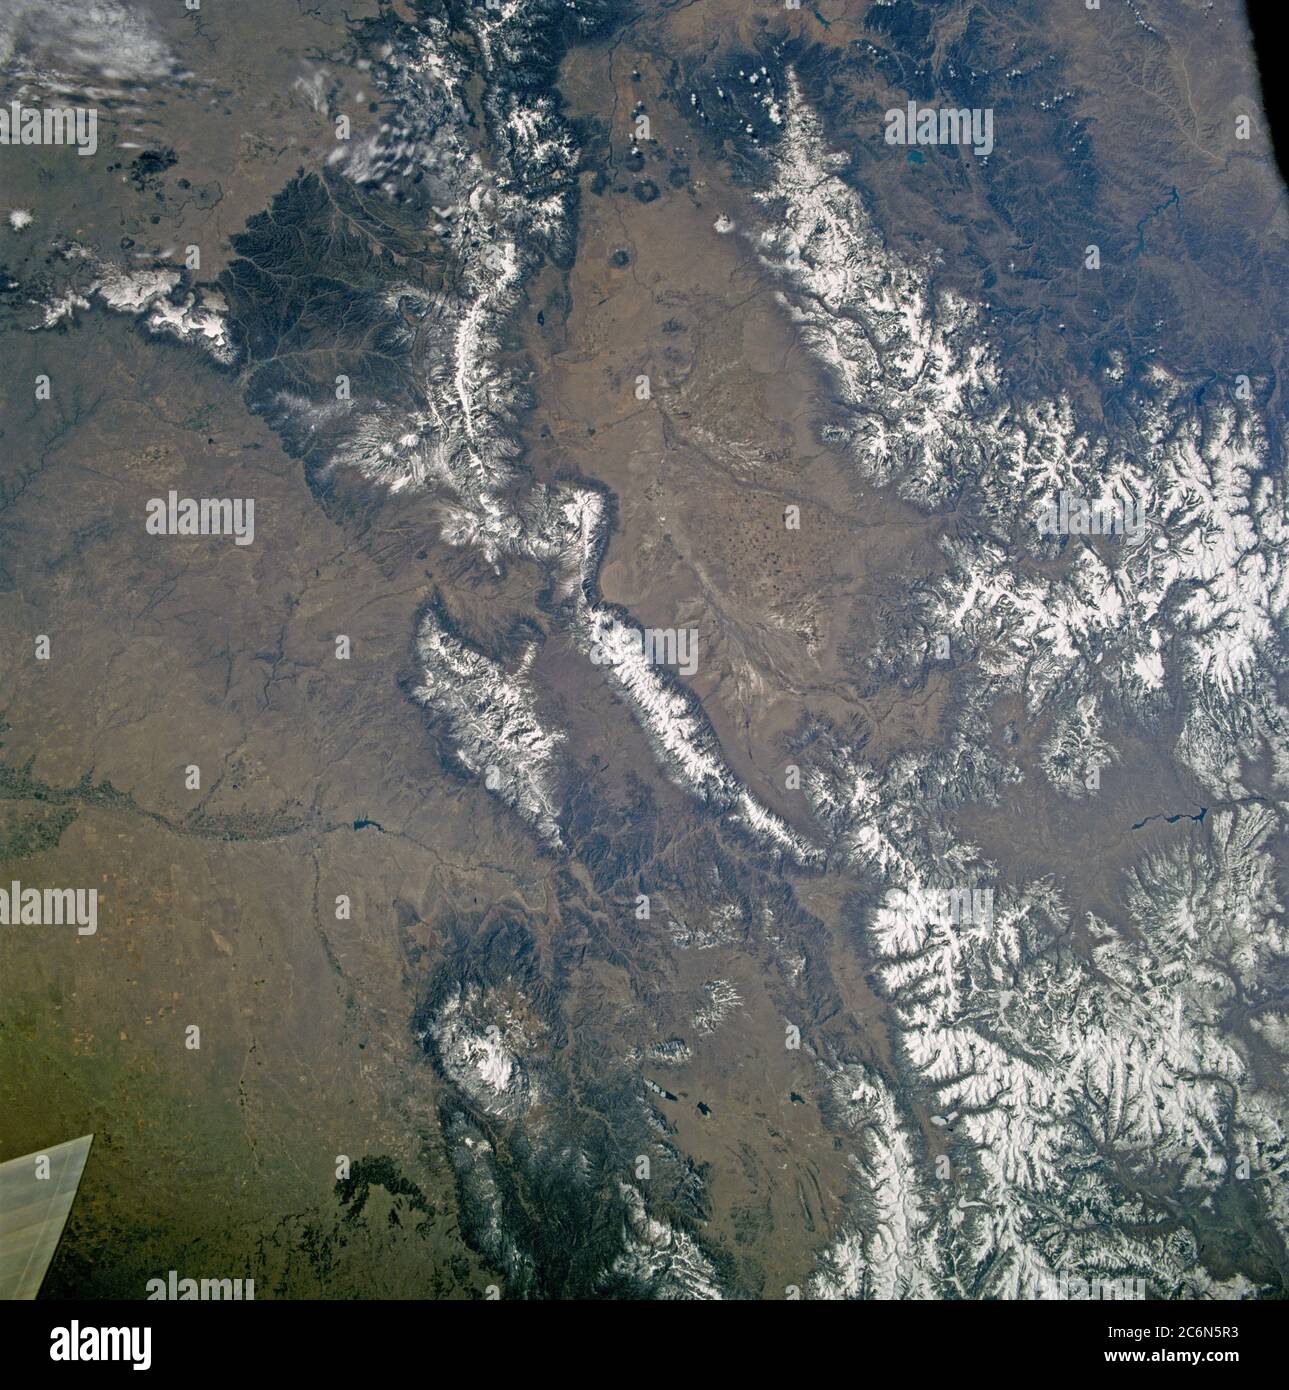 (29 April 1998) --- This view features a 13,980-foot mountain peak in Colorado's Sangre de Cristo Mountains in Saguache County, photographed by crewmembers of the STS-90 Space Shuttle Columbia mission in April 1998. Stock Photo